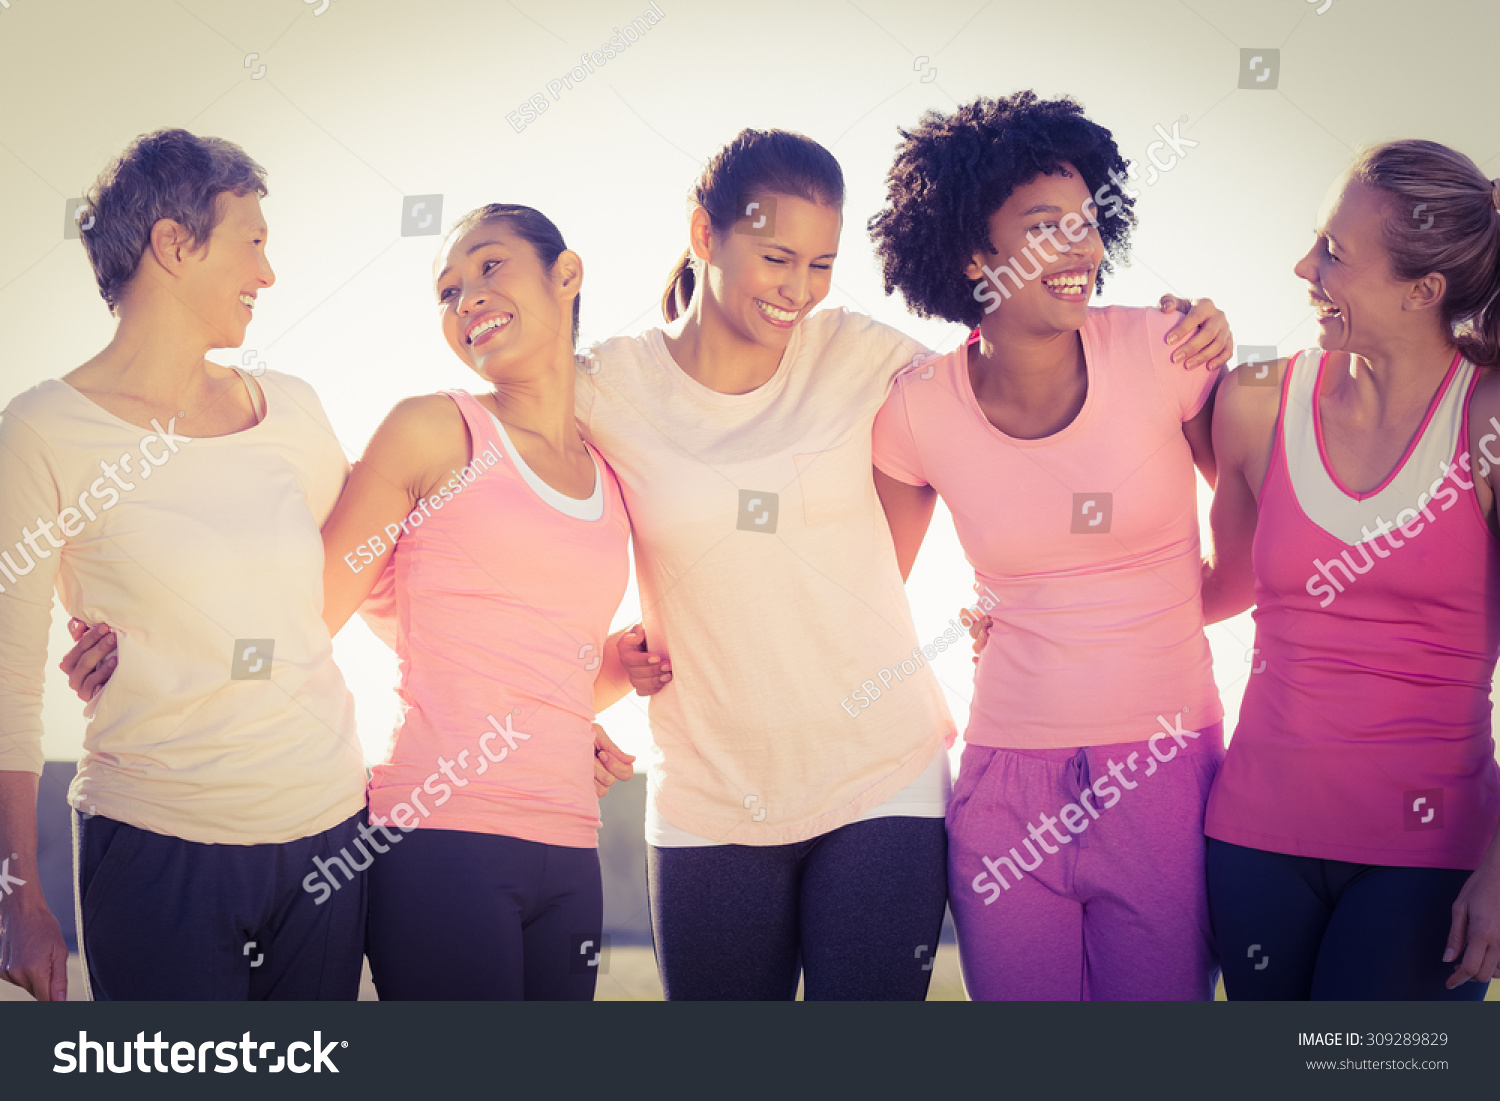 Laughing women wearing pink for breast cancer in parkland #309289829